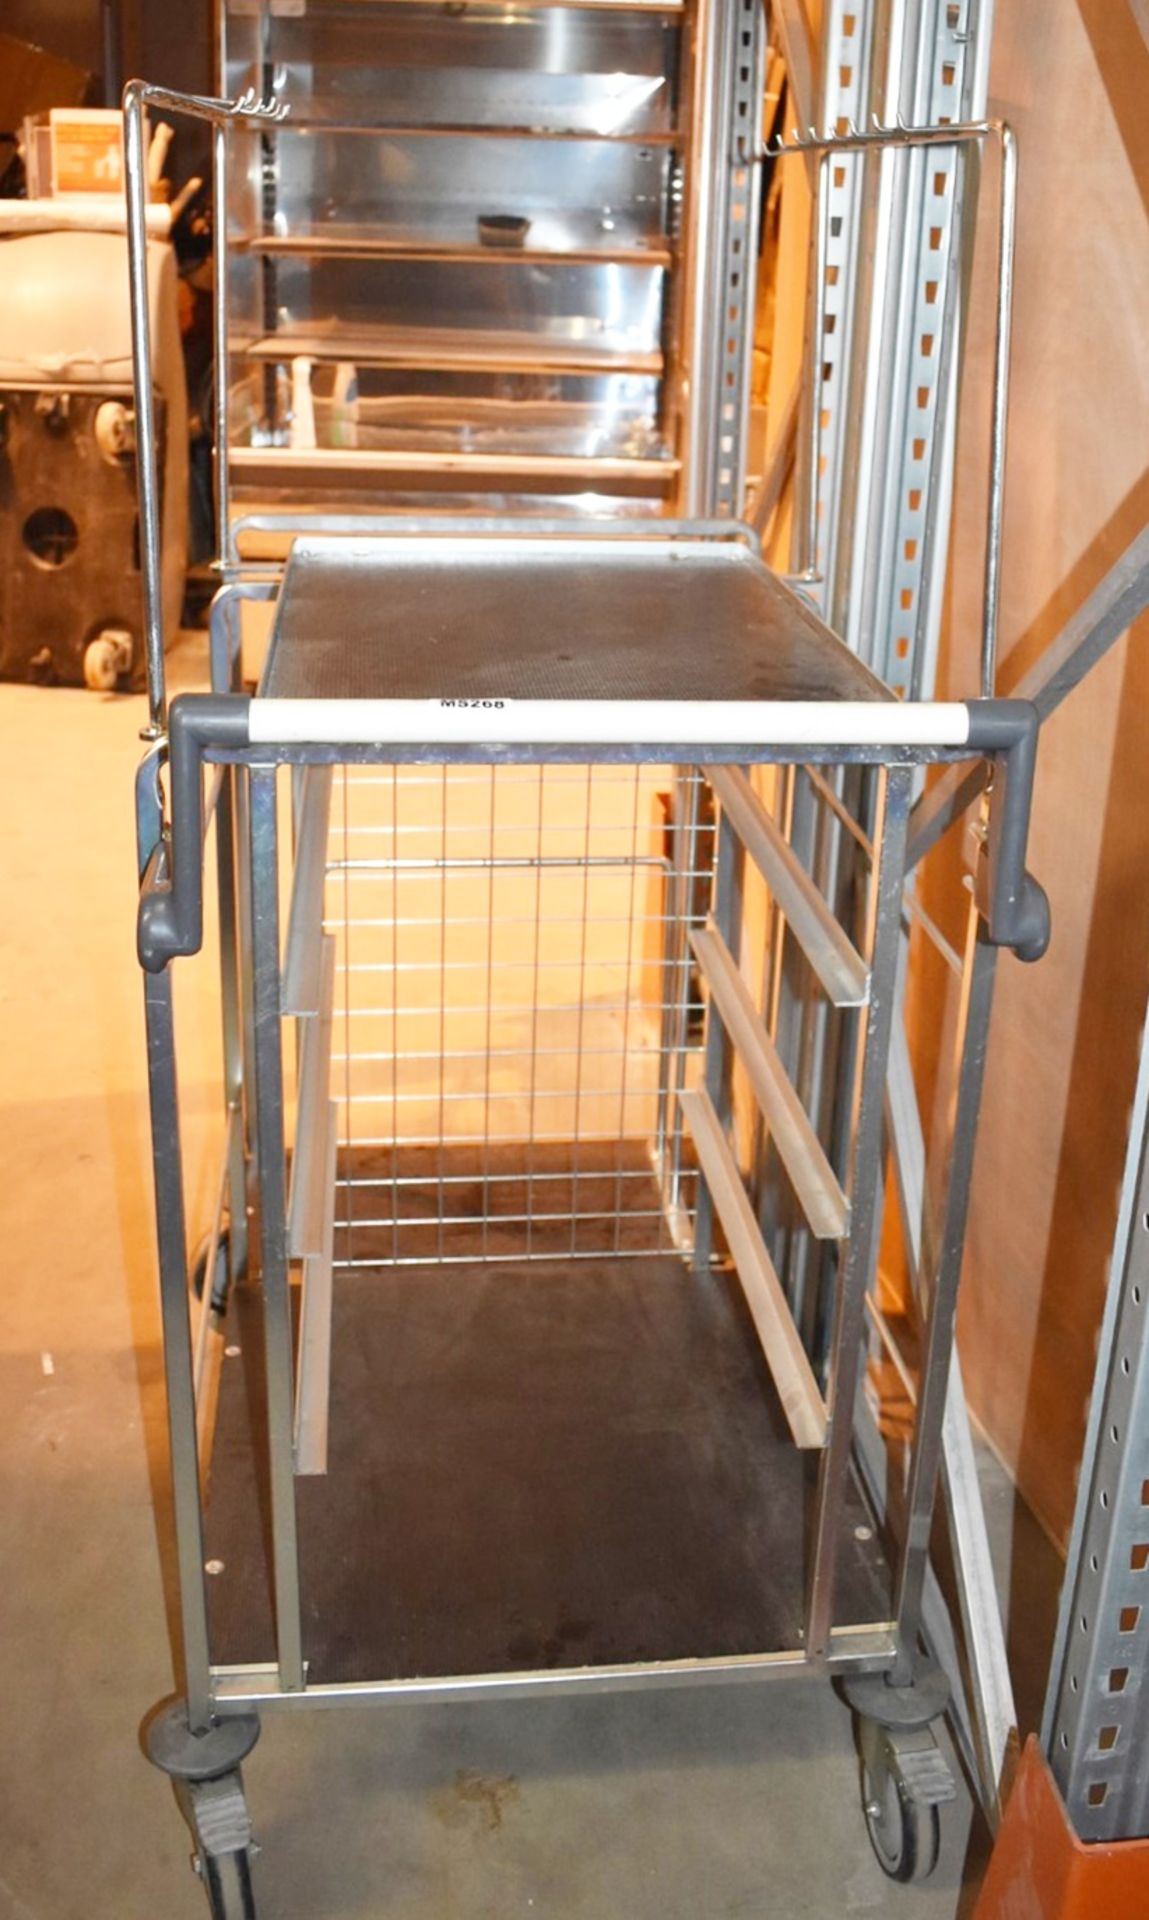 1 x Mobile Warehouse Picking / Transport Trolley - Dimensions: H108/143 x W104 x D64cm - CL533 - Ref - Image 8 of 9